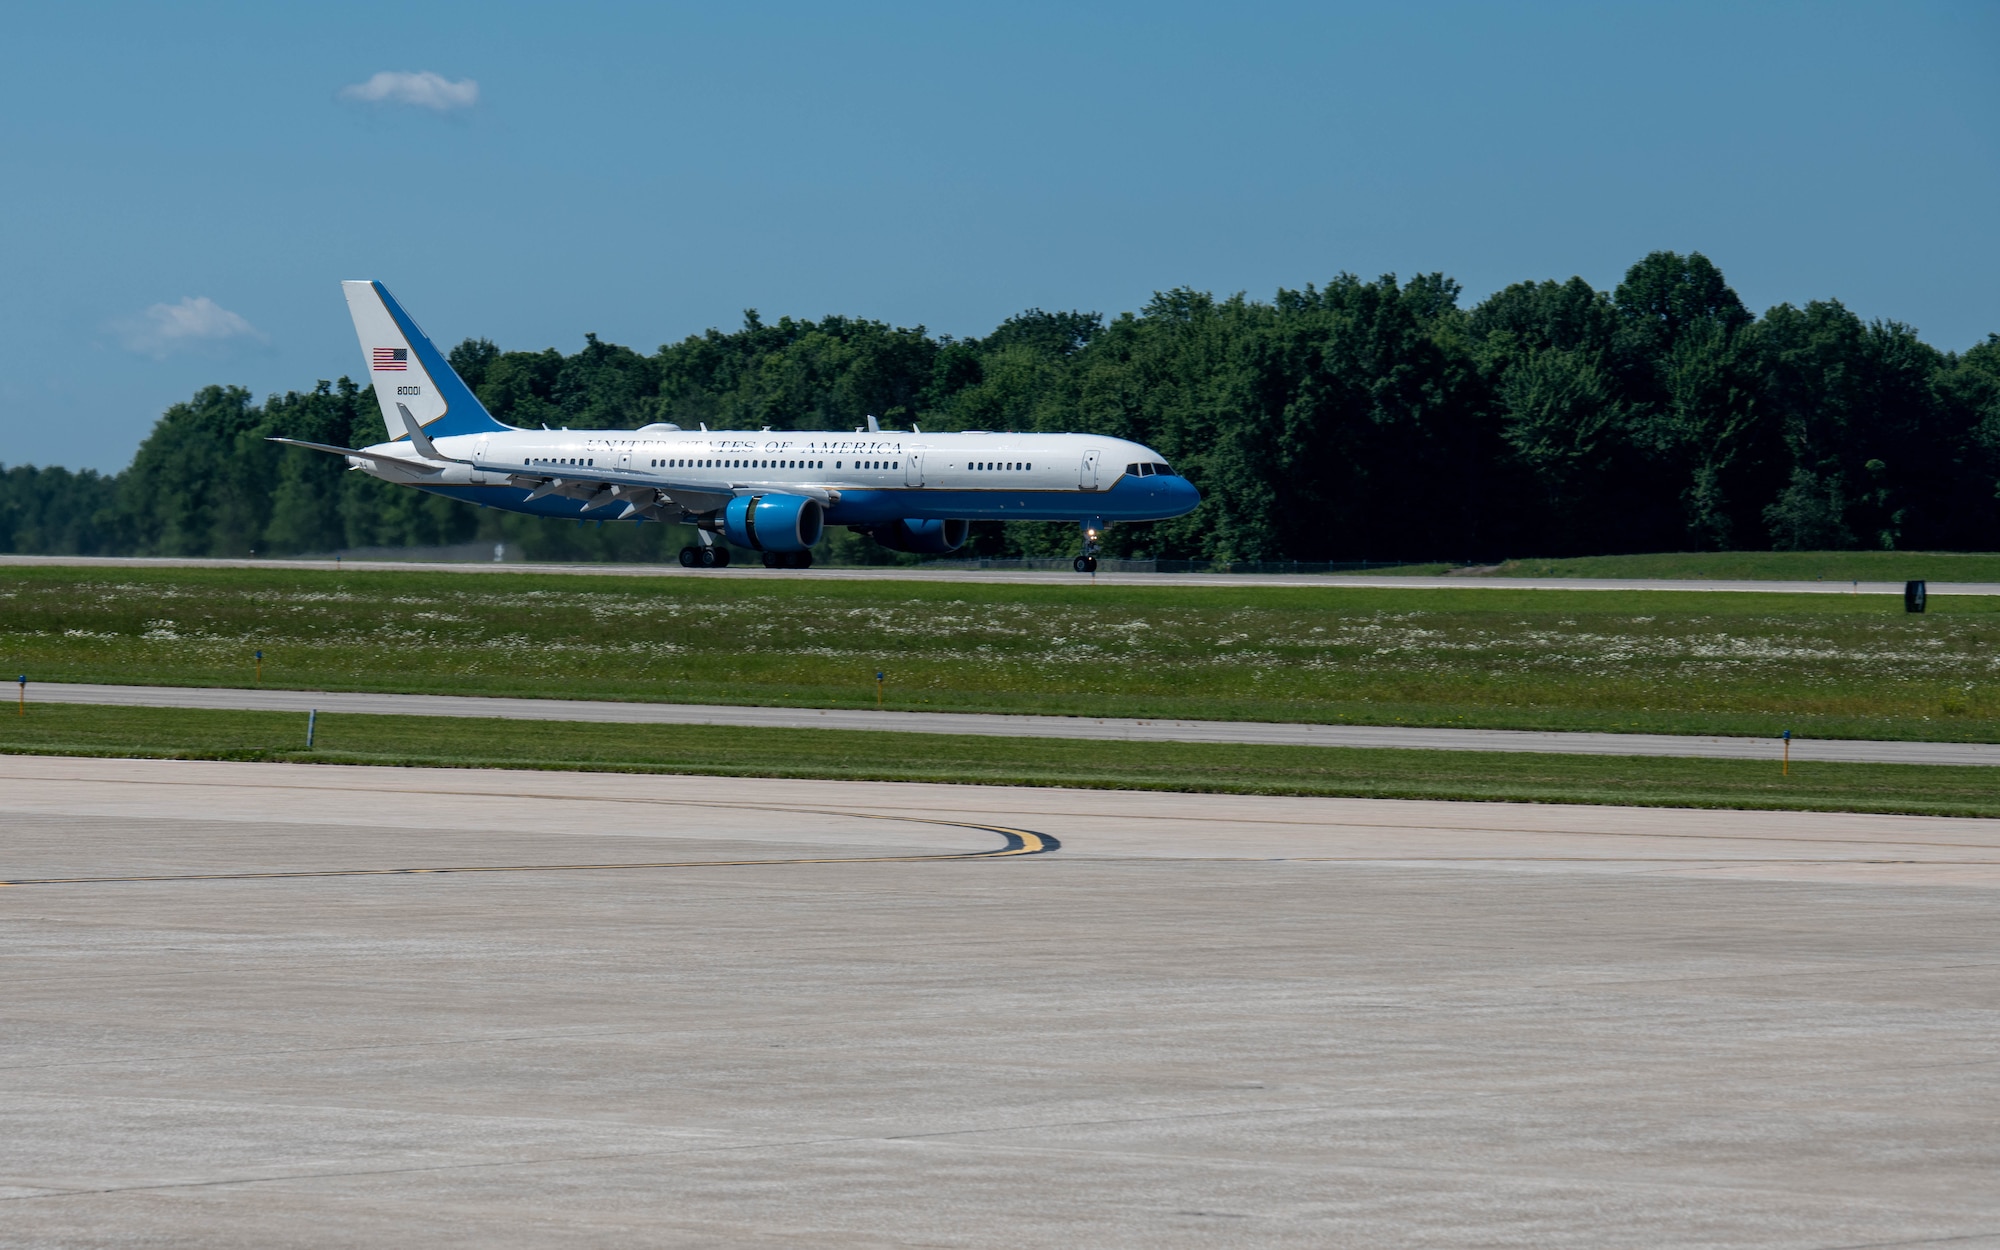 U.S. Vice President Mike Pence landed at YARS before attending a local event June 25, 2020.